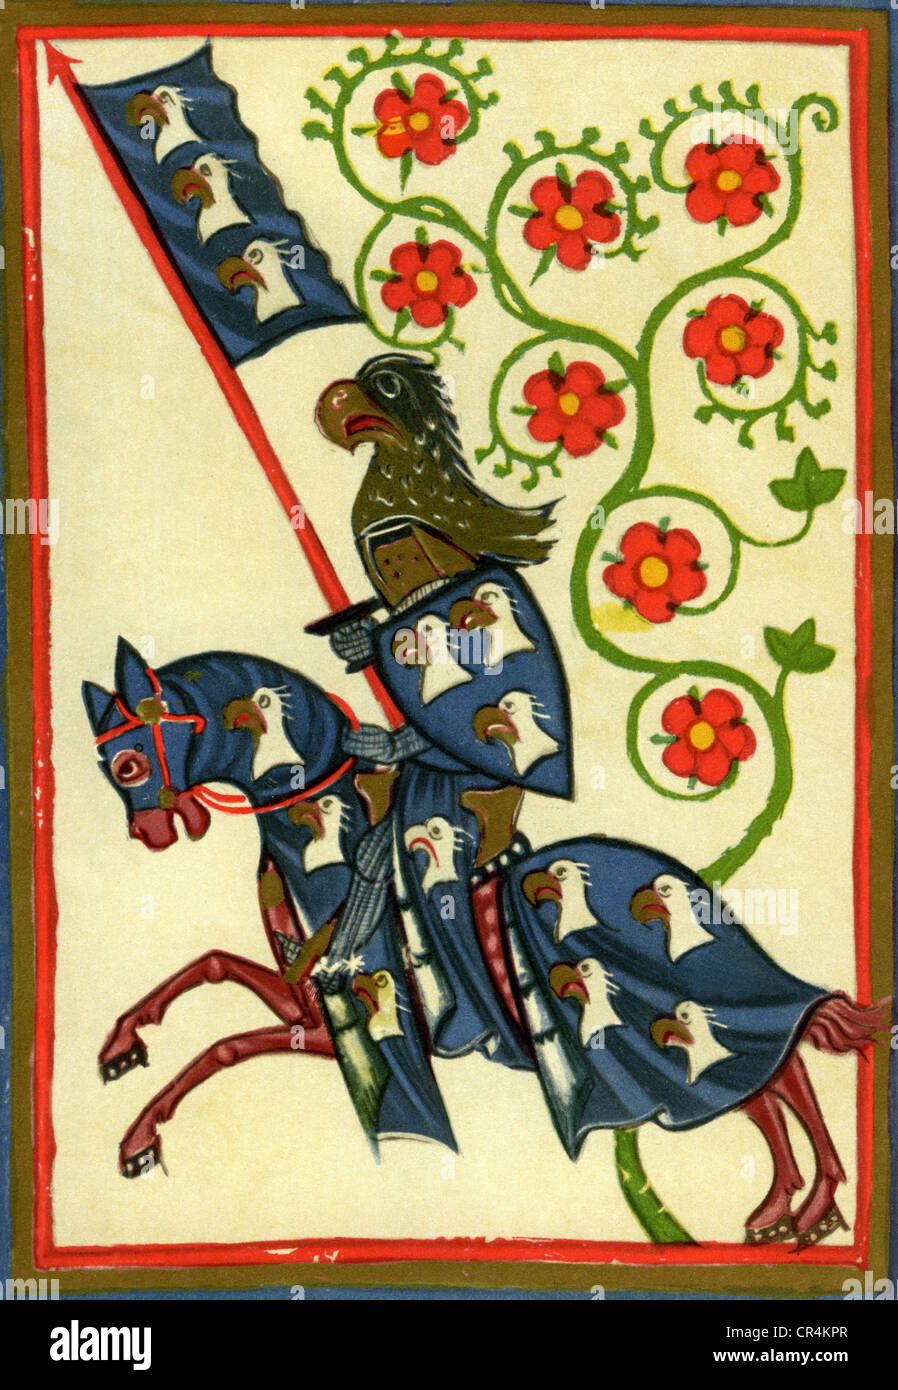 Hartmann von Aue, German poet, 13th century, minnesinger, in armour on horseback, illustration from the Codex Manesse, early 14th century, Artist's Copyright has not to be cleared Stock Photo